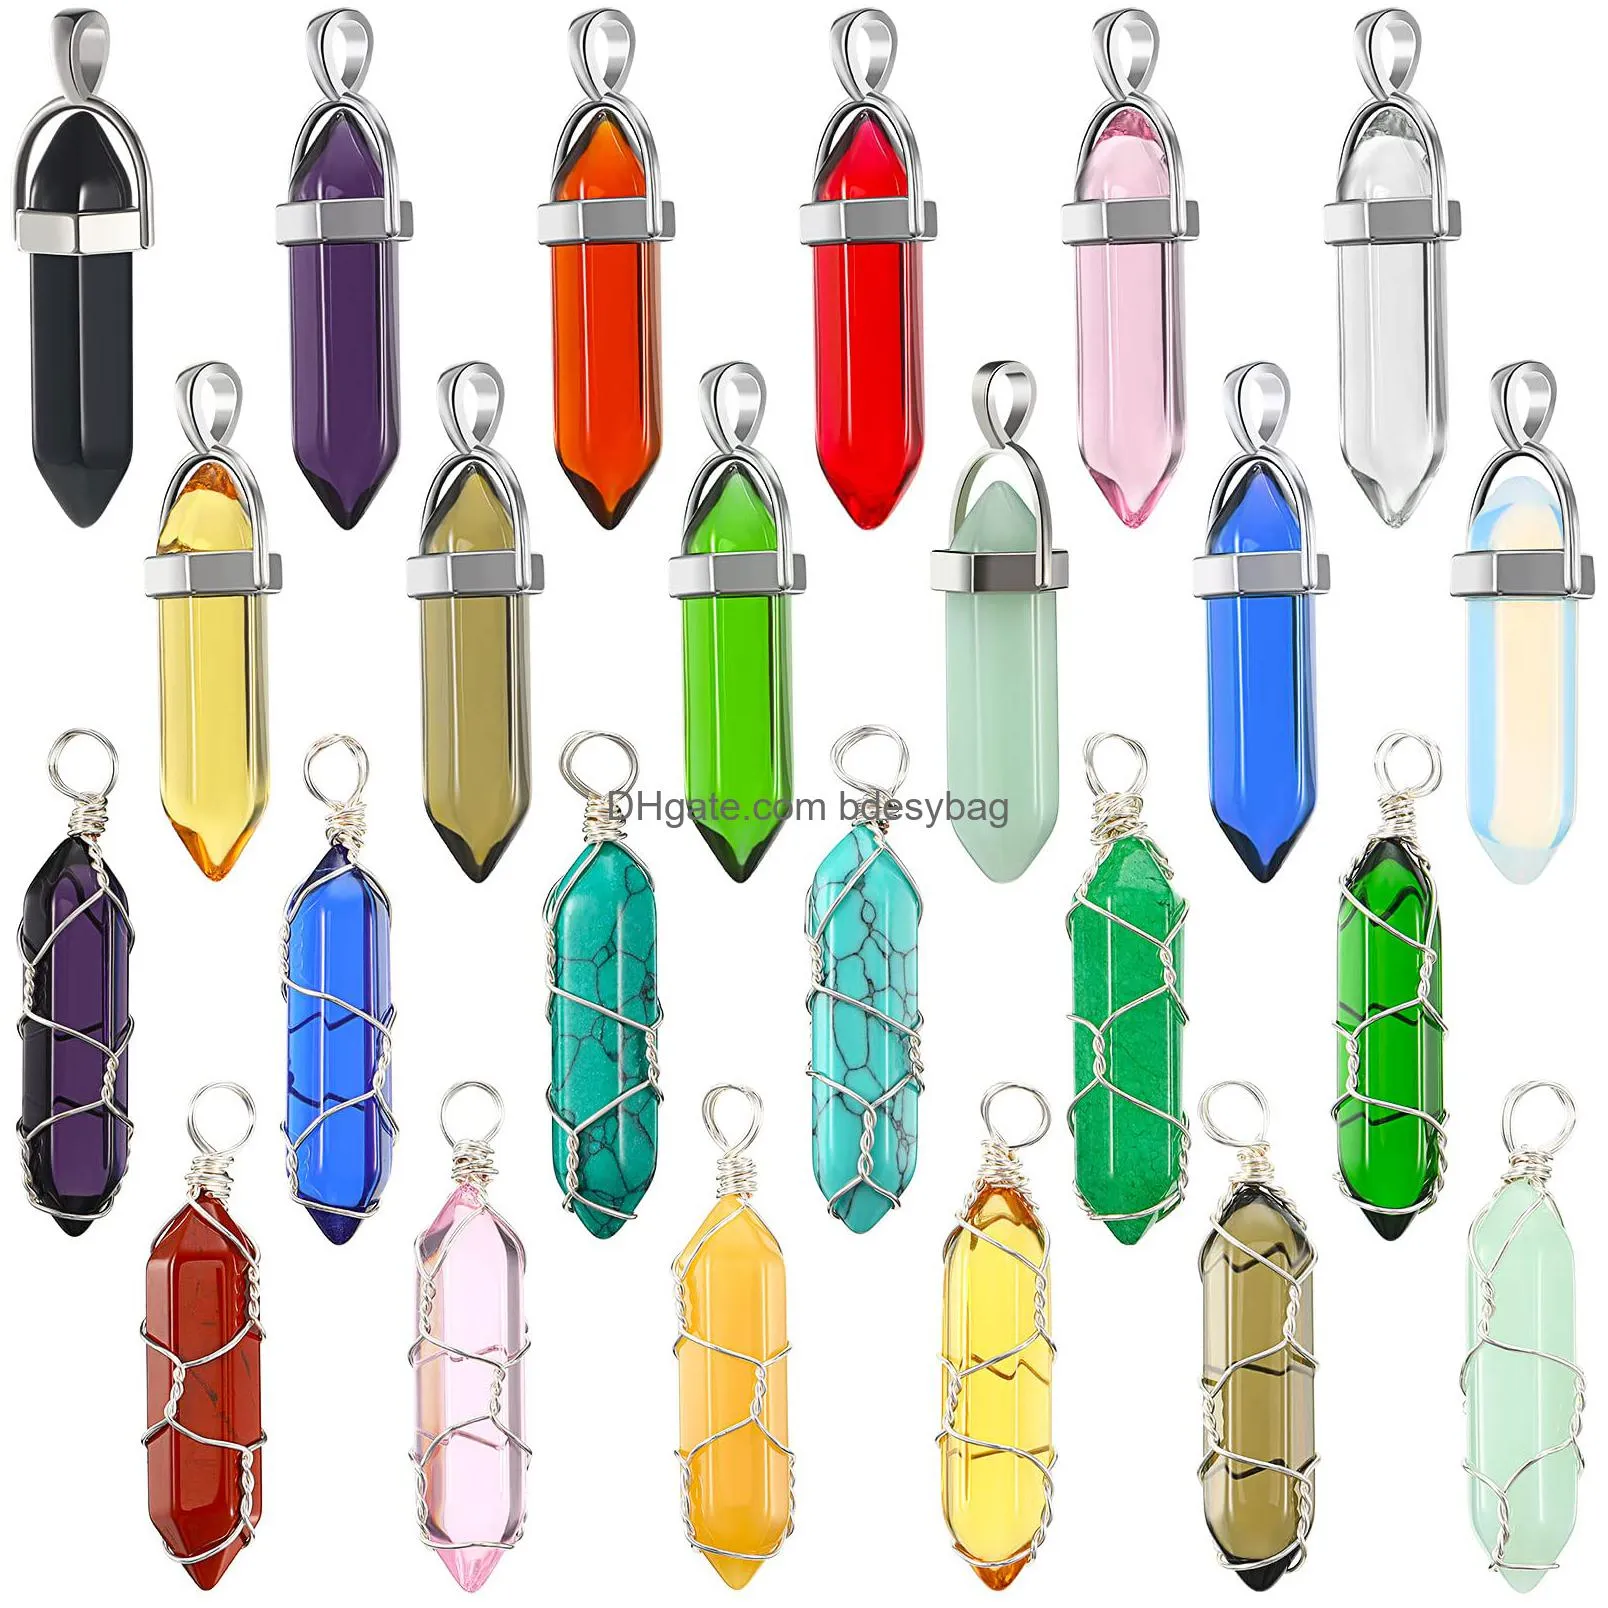 teardrop gemstone pendant stone natural crystal quartz stone charms chakra necklace with 50 faux leather cords for women girls jewelry making